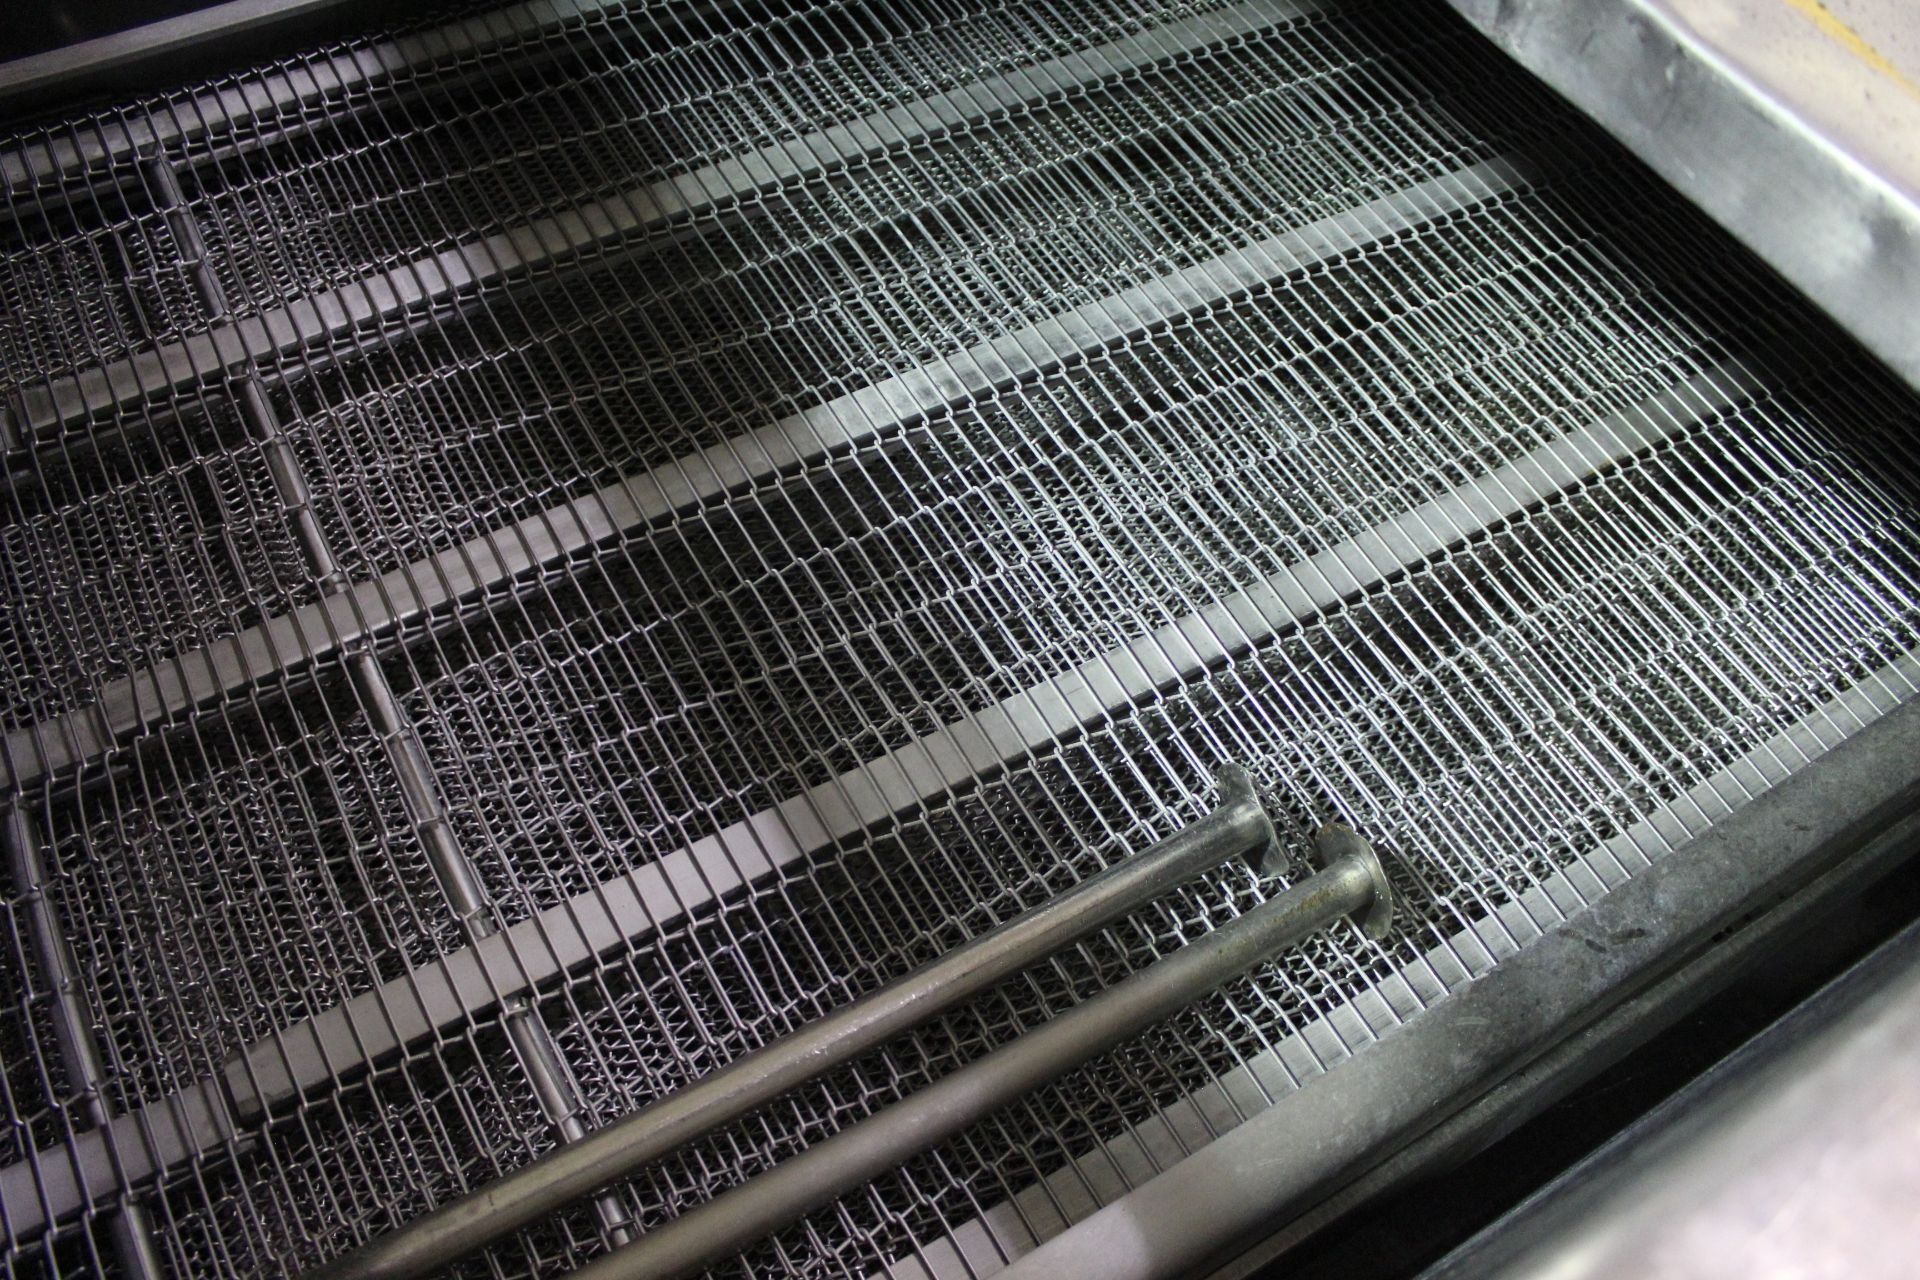 Stainless Steel Continuous Submersion Cooking Conveyor with Top Hold Down Belt, 30" Belts, 35"W X 23 - Image 3 of 4